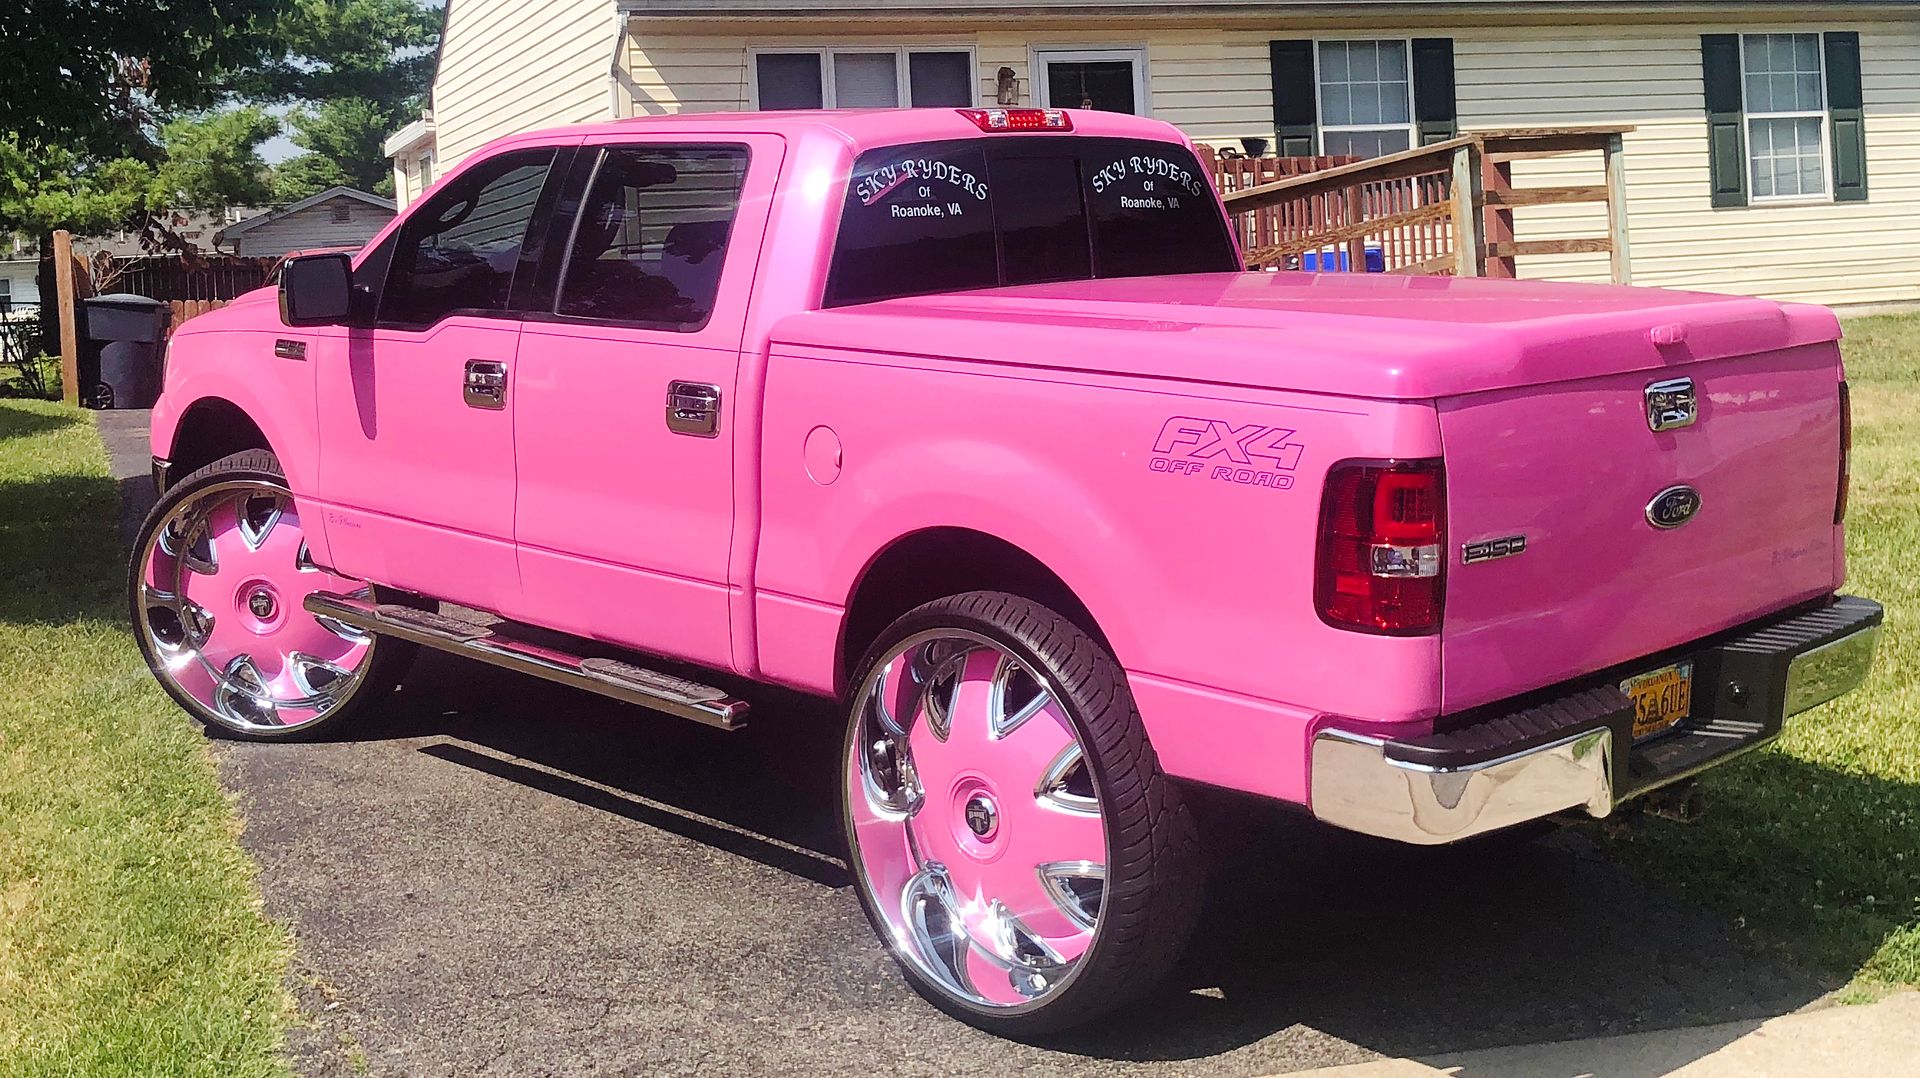 Ace 1 Candy Pink Ford F 150 Truck On 32 Dub Bandito